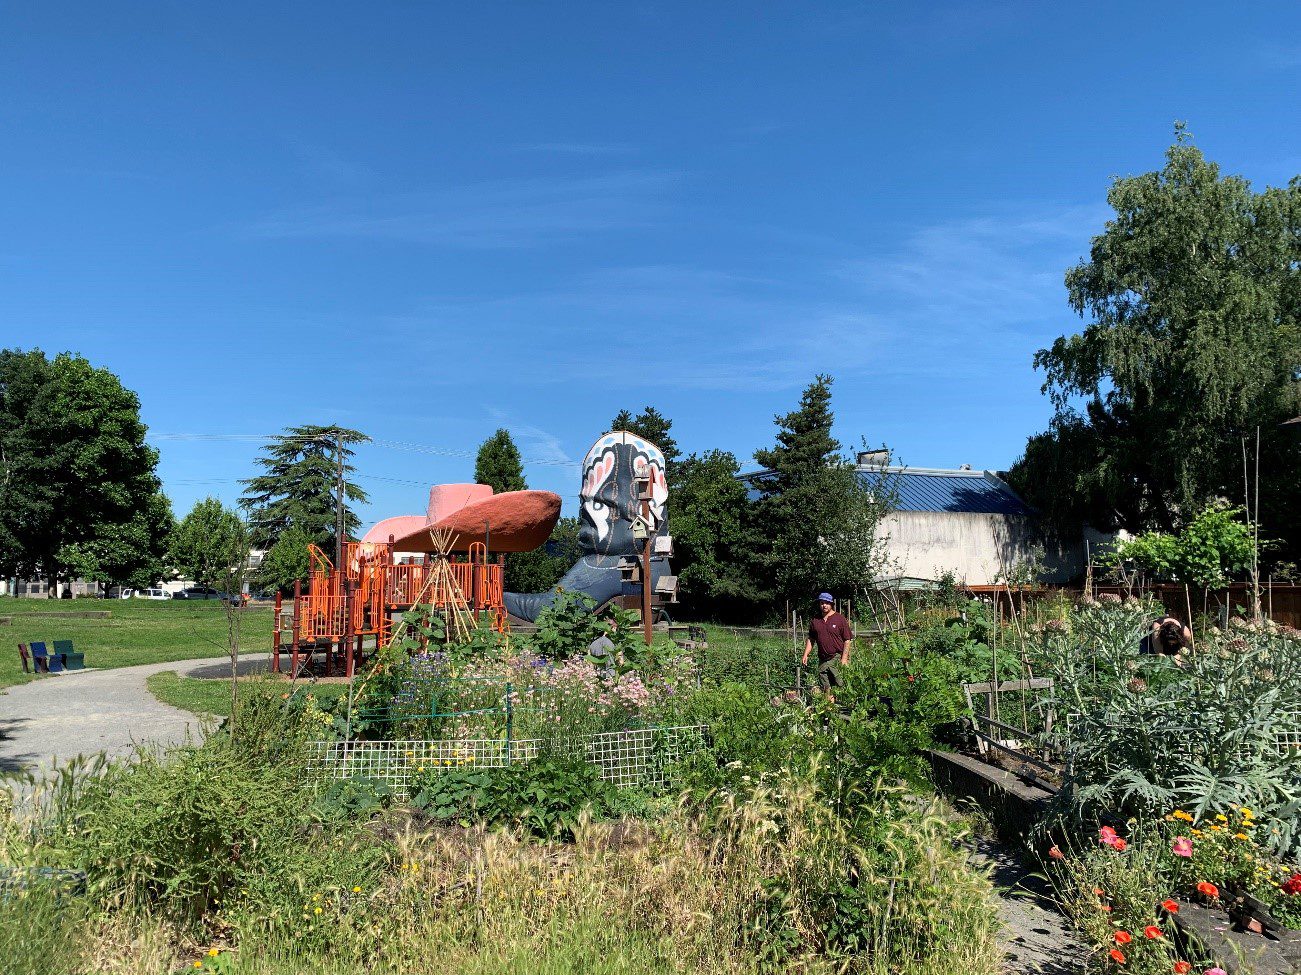 A person walking among plants and tall grasses on a sunny day. In the background is a large cowboy hat and boot statue.